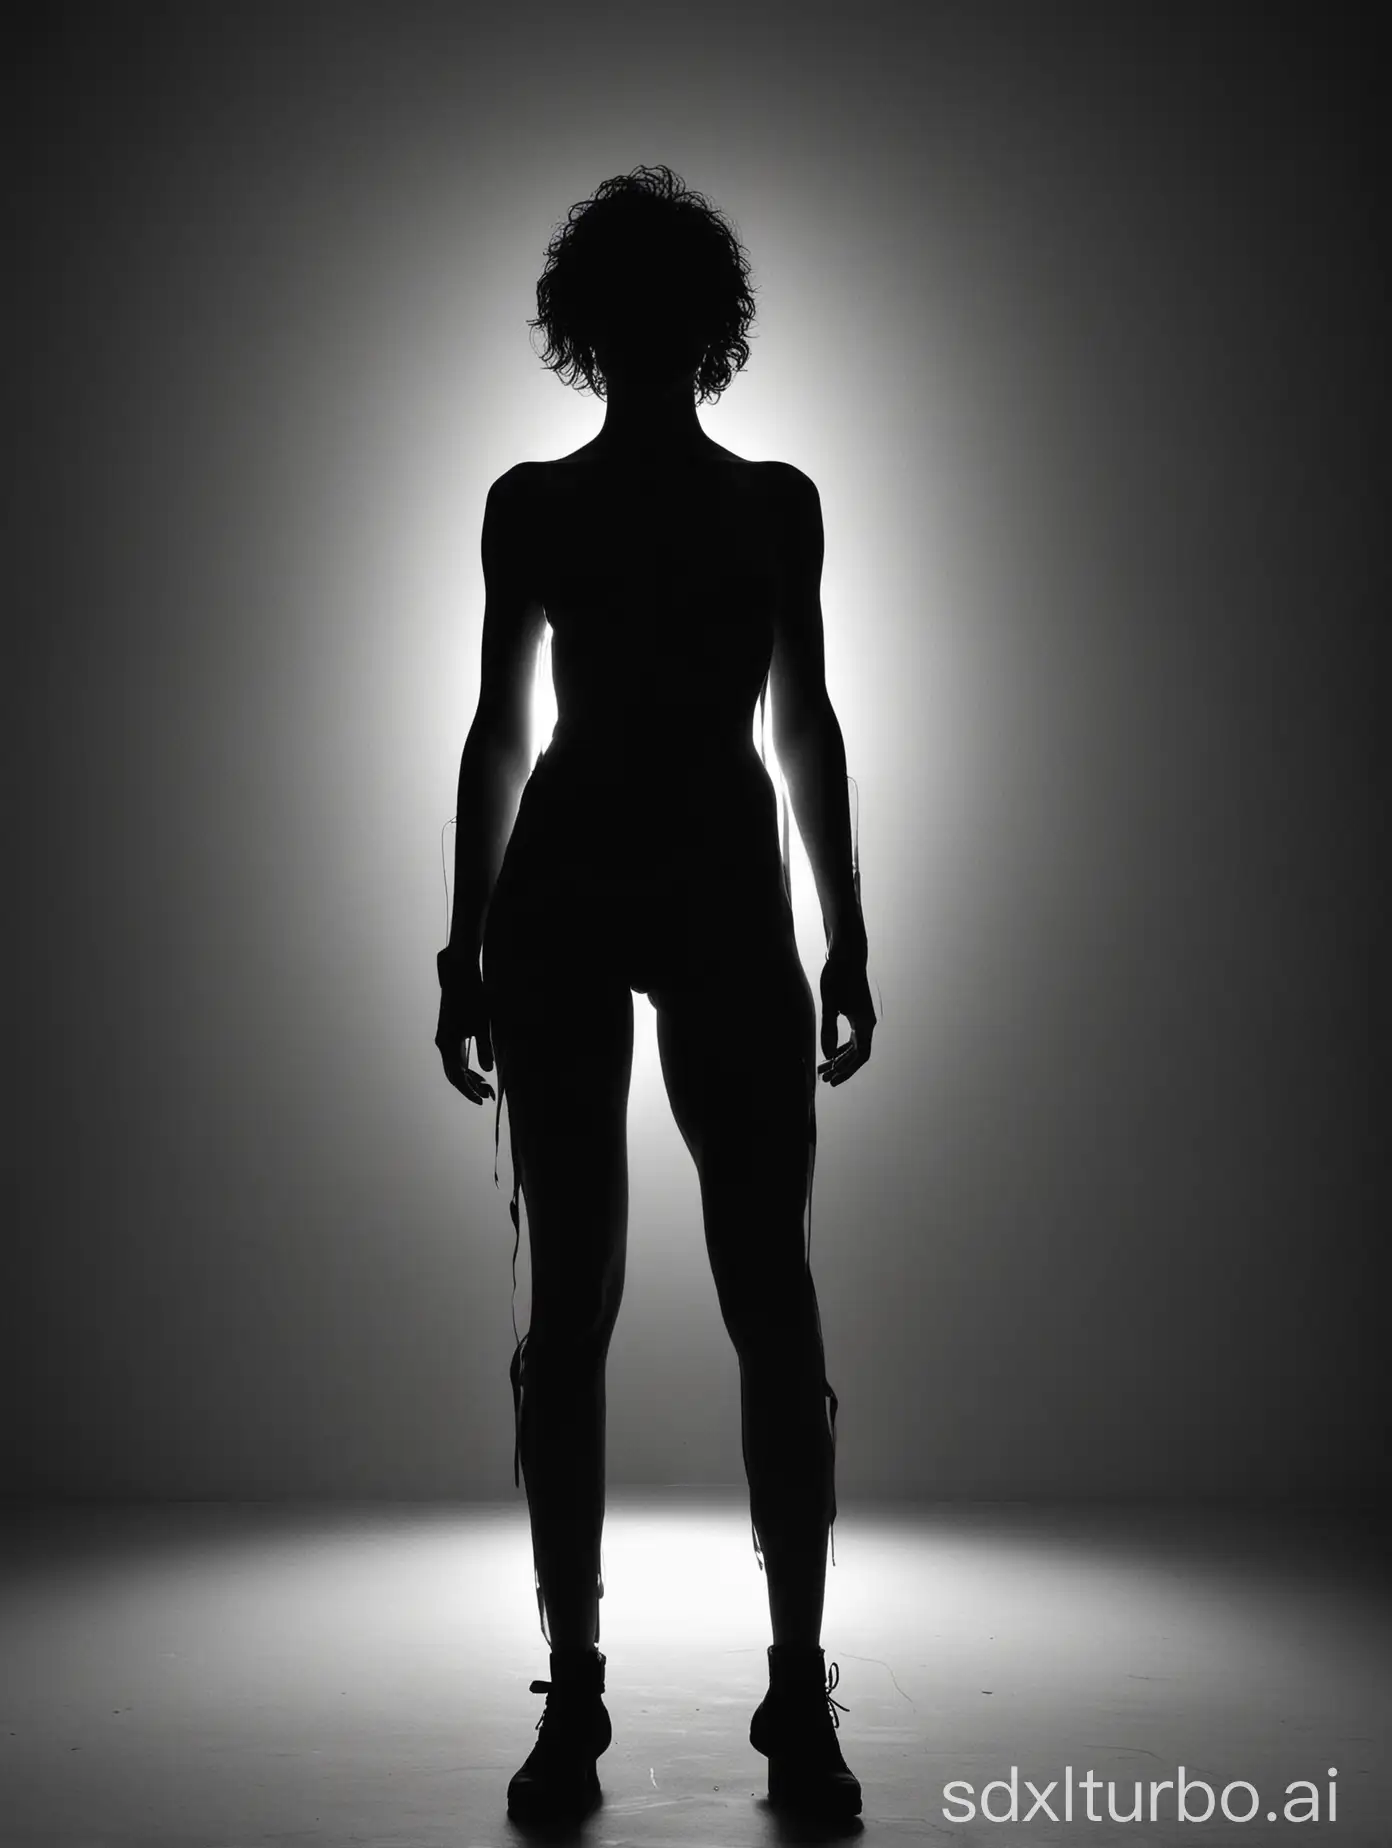 Silhouette-of-Woman-Against-Powerful-Backlight-Chaos-8-Stylize-200